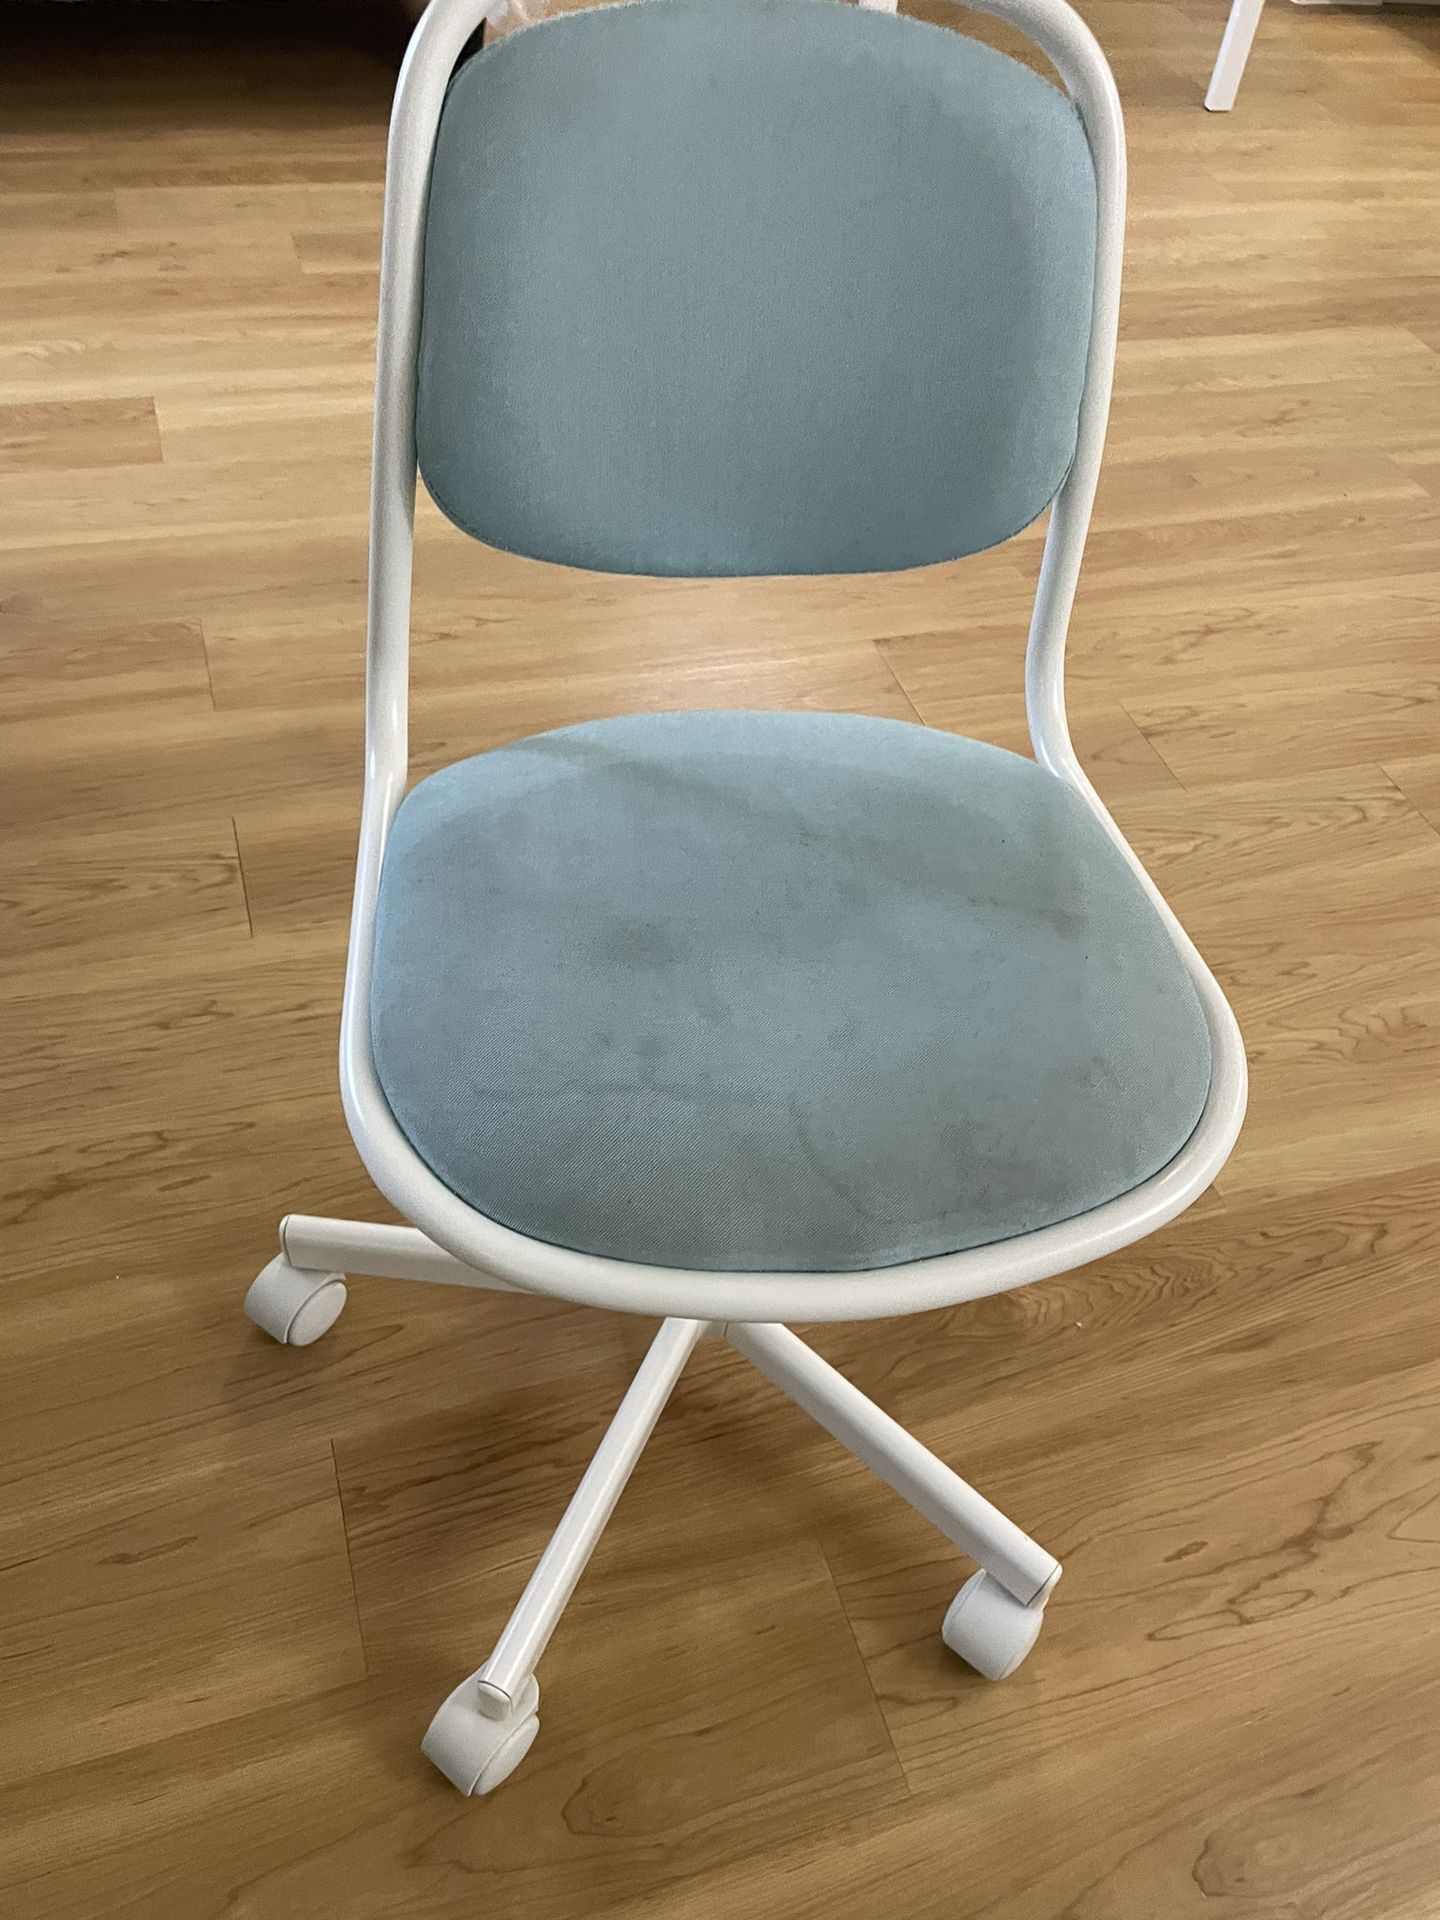 IKEA ORFJALL desk chair for kids